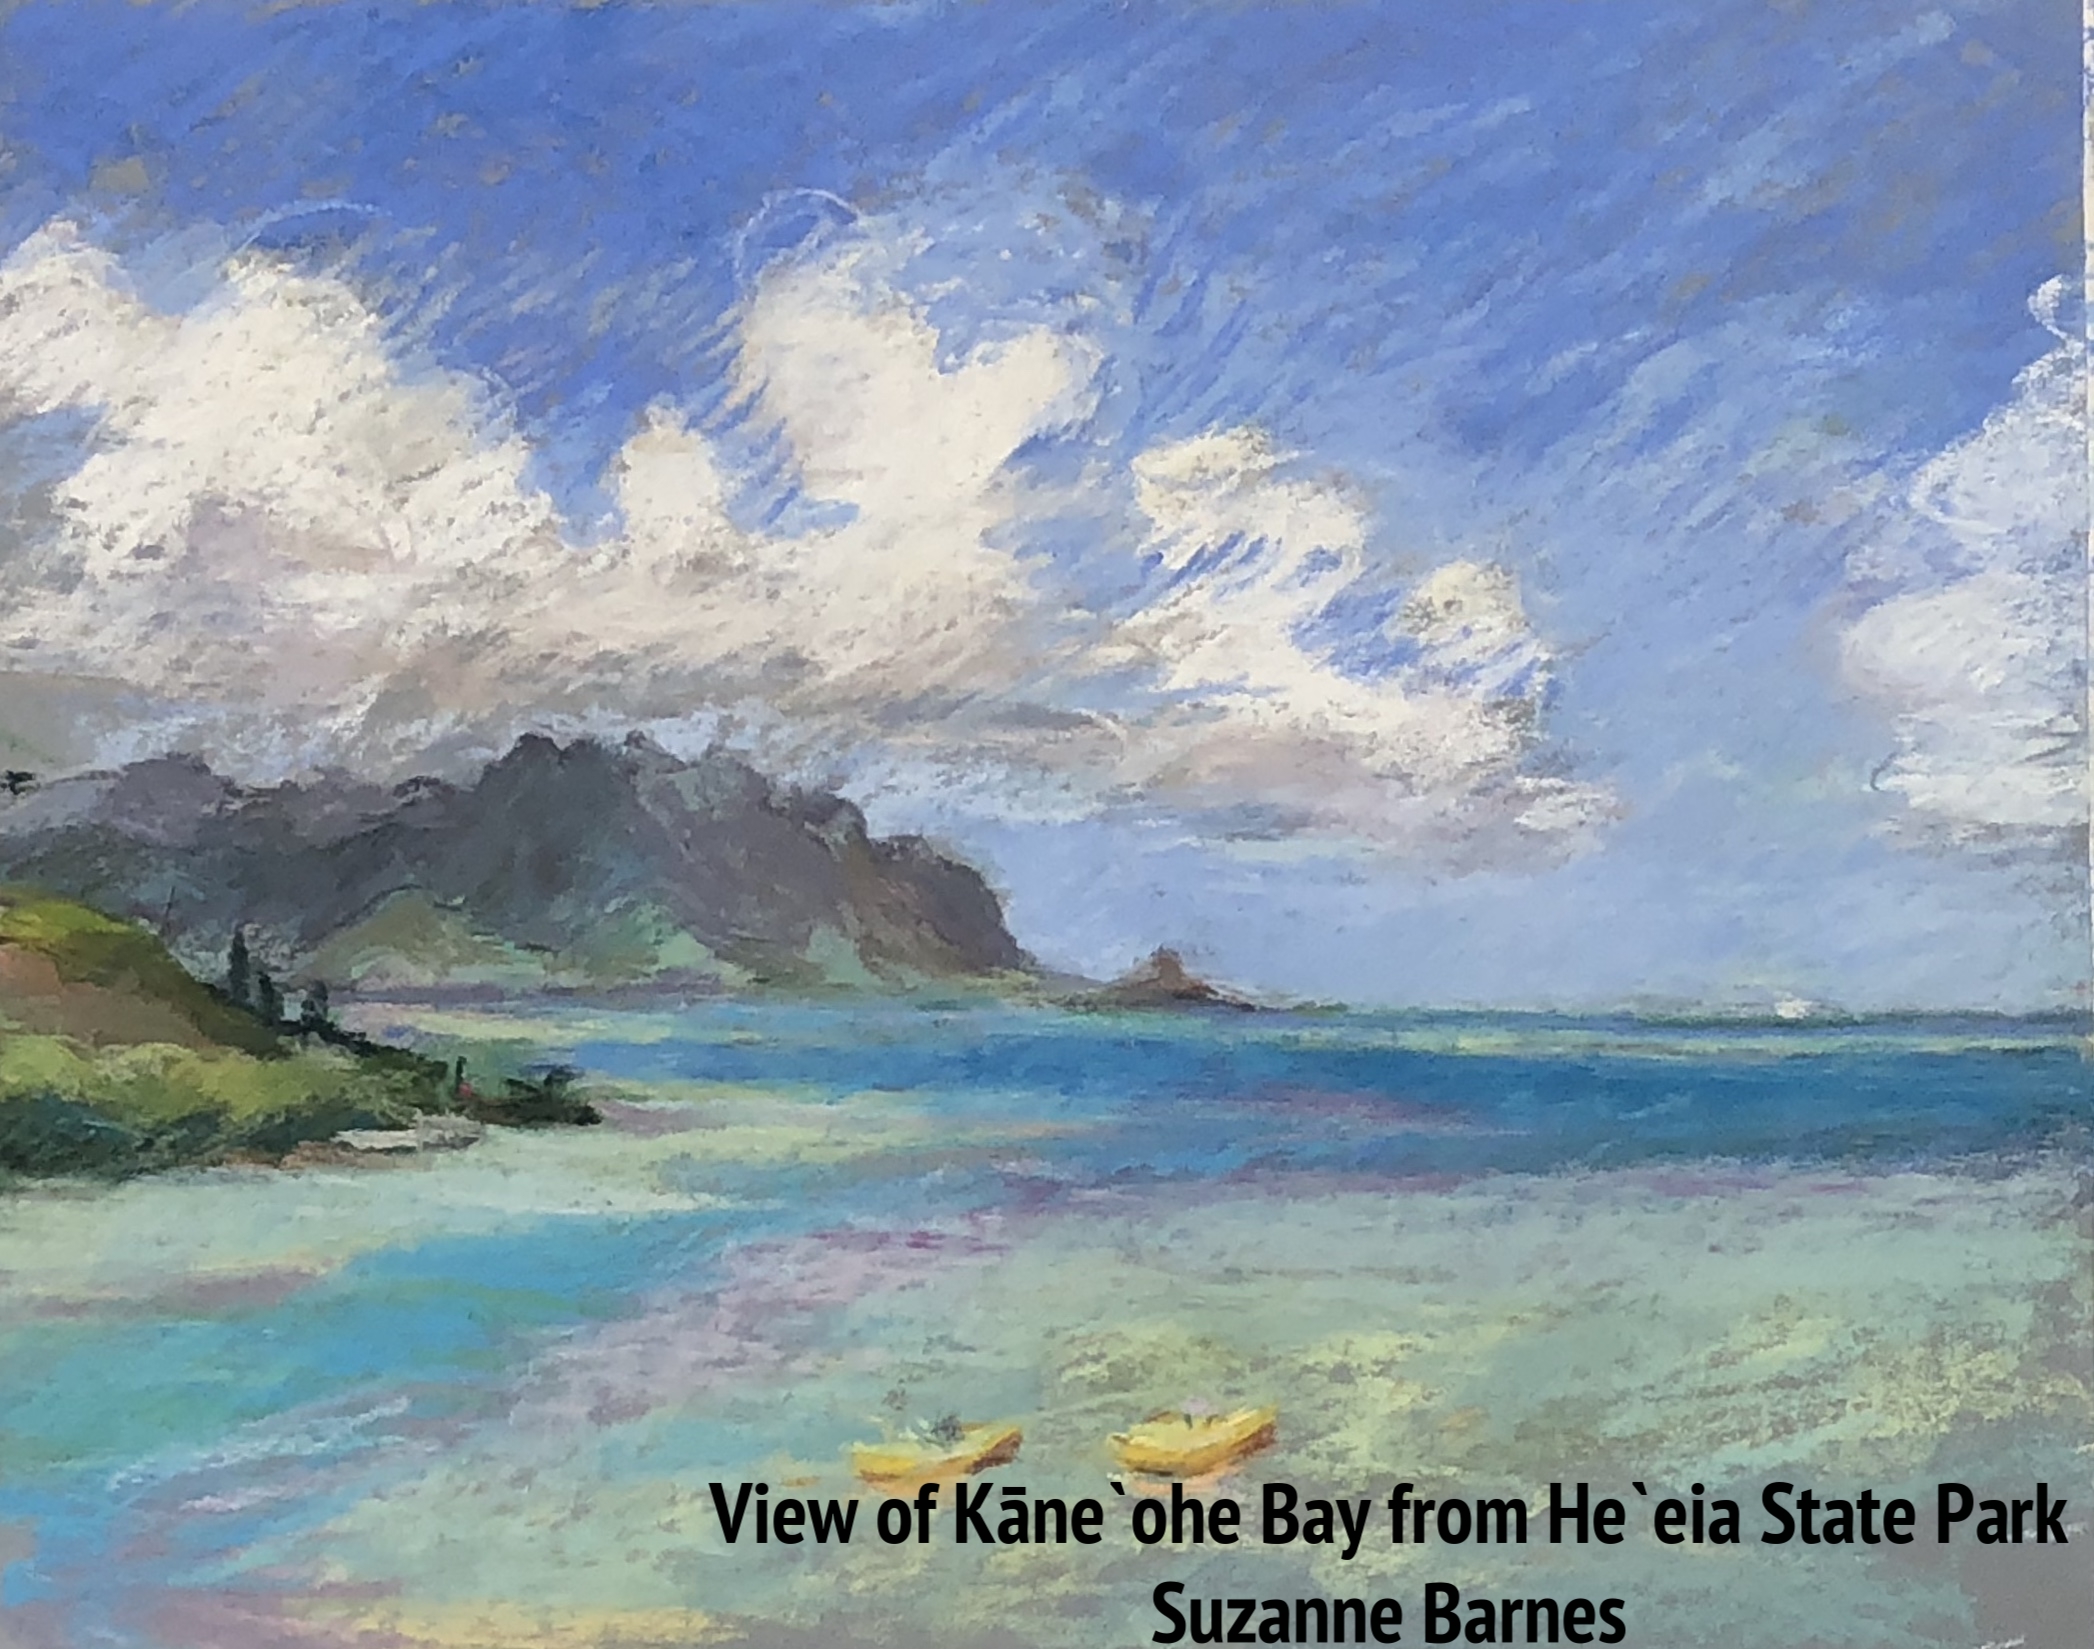 View of Kāne`ohe Bay from He`eia State Park